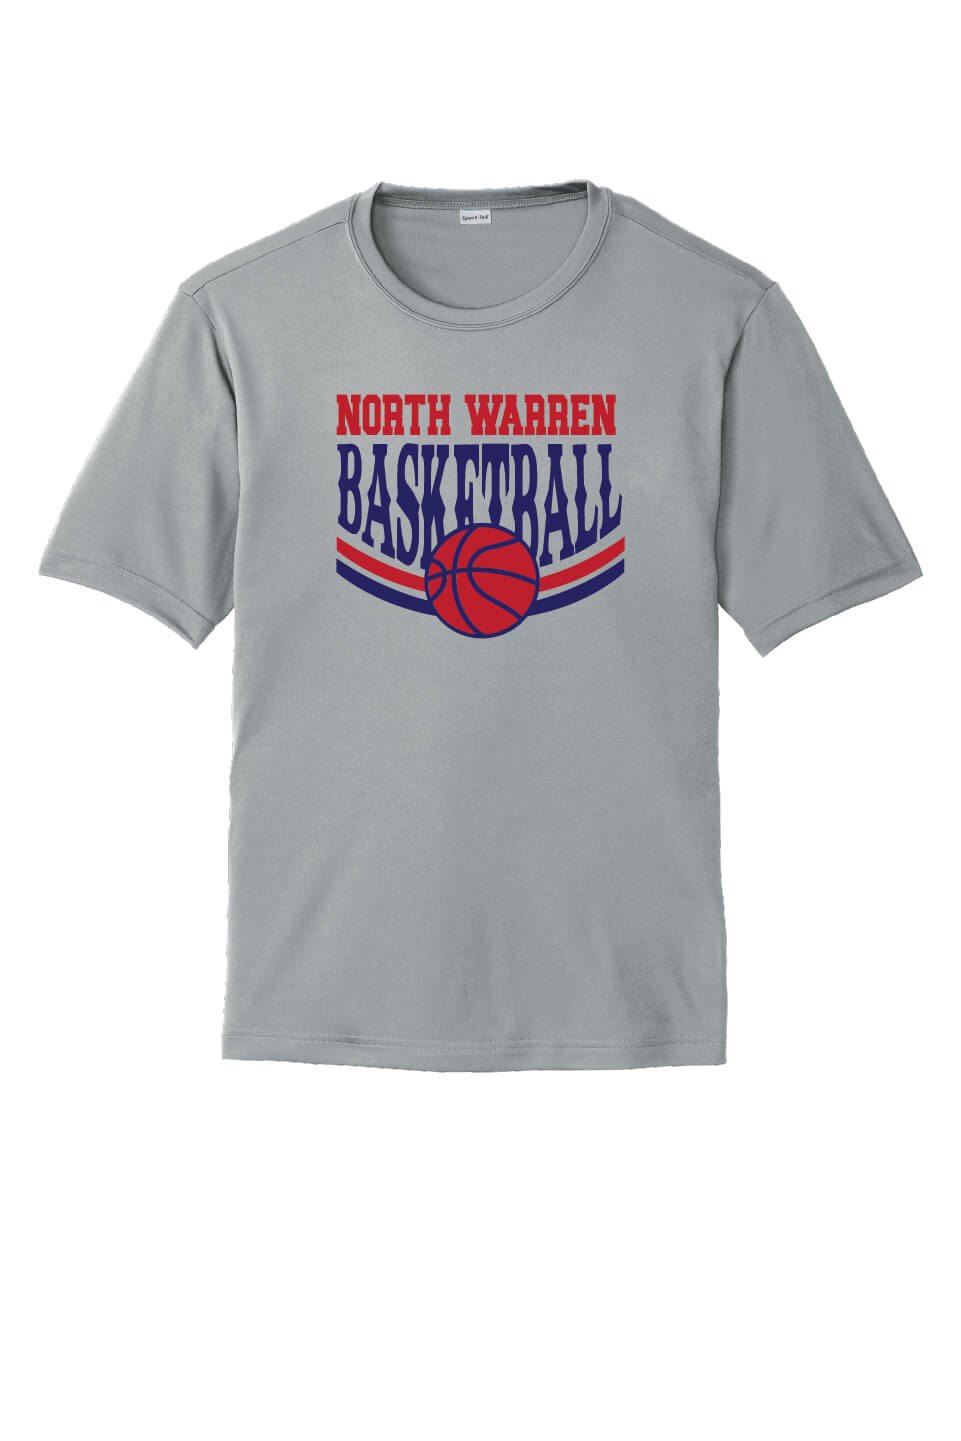 NW Basketball Sport Tek Competitor Short Sleeve Tee (Youth) gray